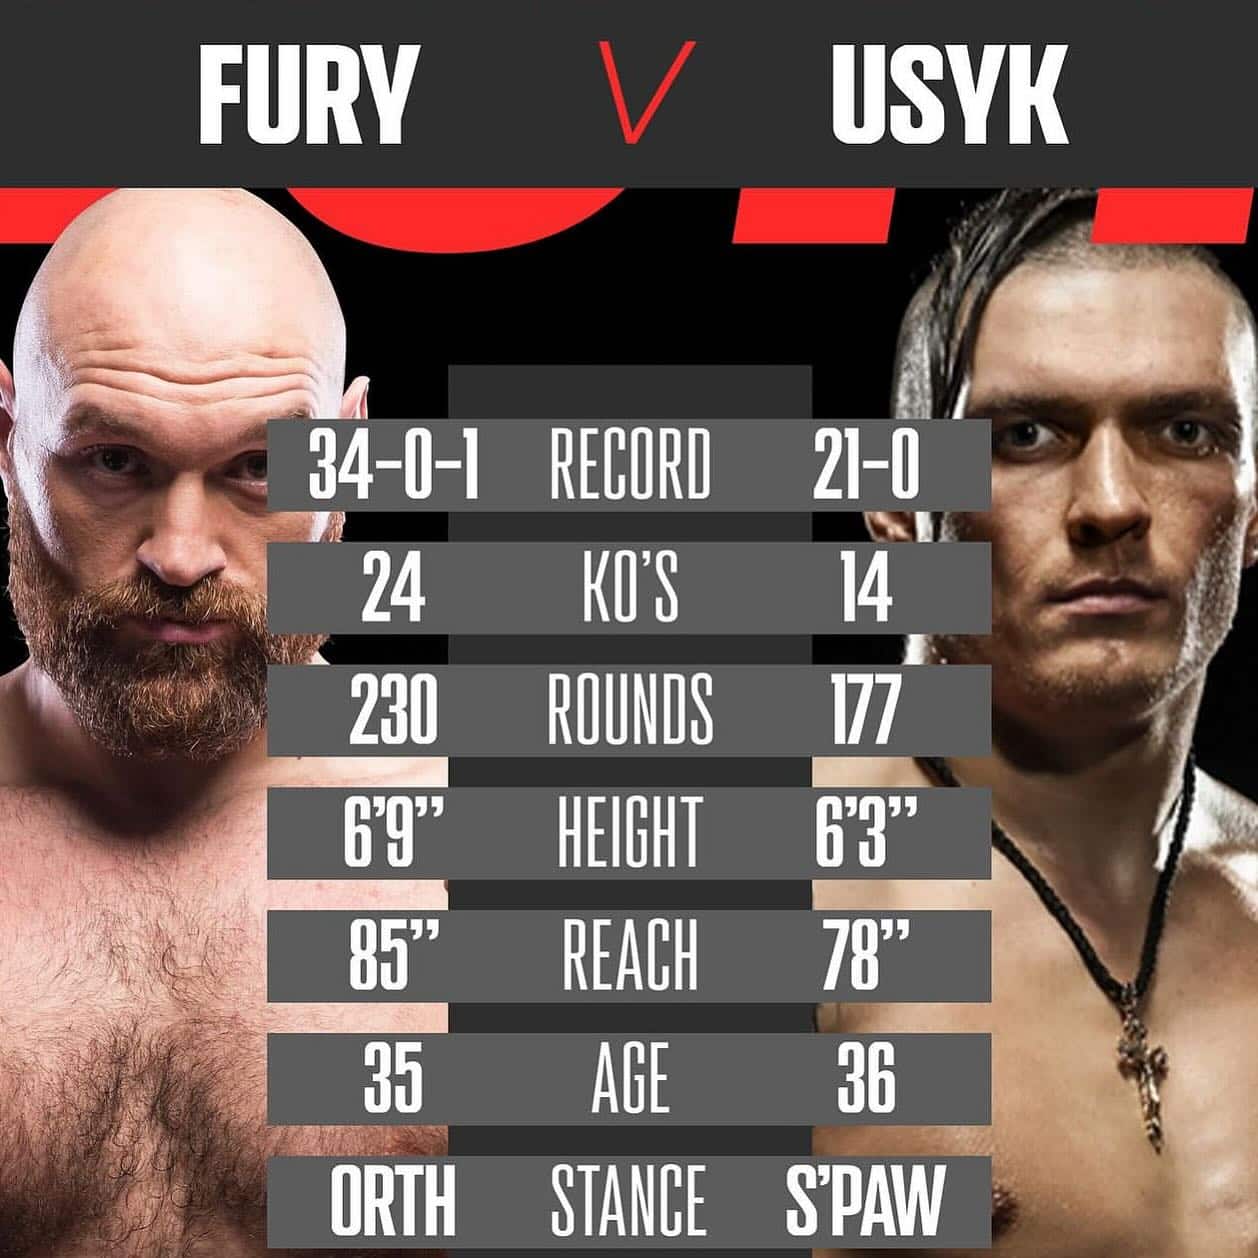 Fury vs. Usyk: Heavyweight Fight for the Ages This Saturday in Riyadh